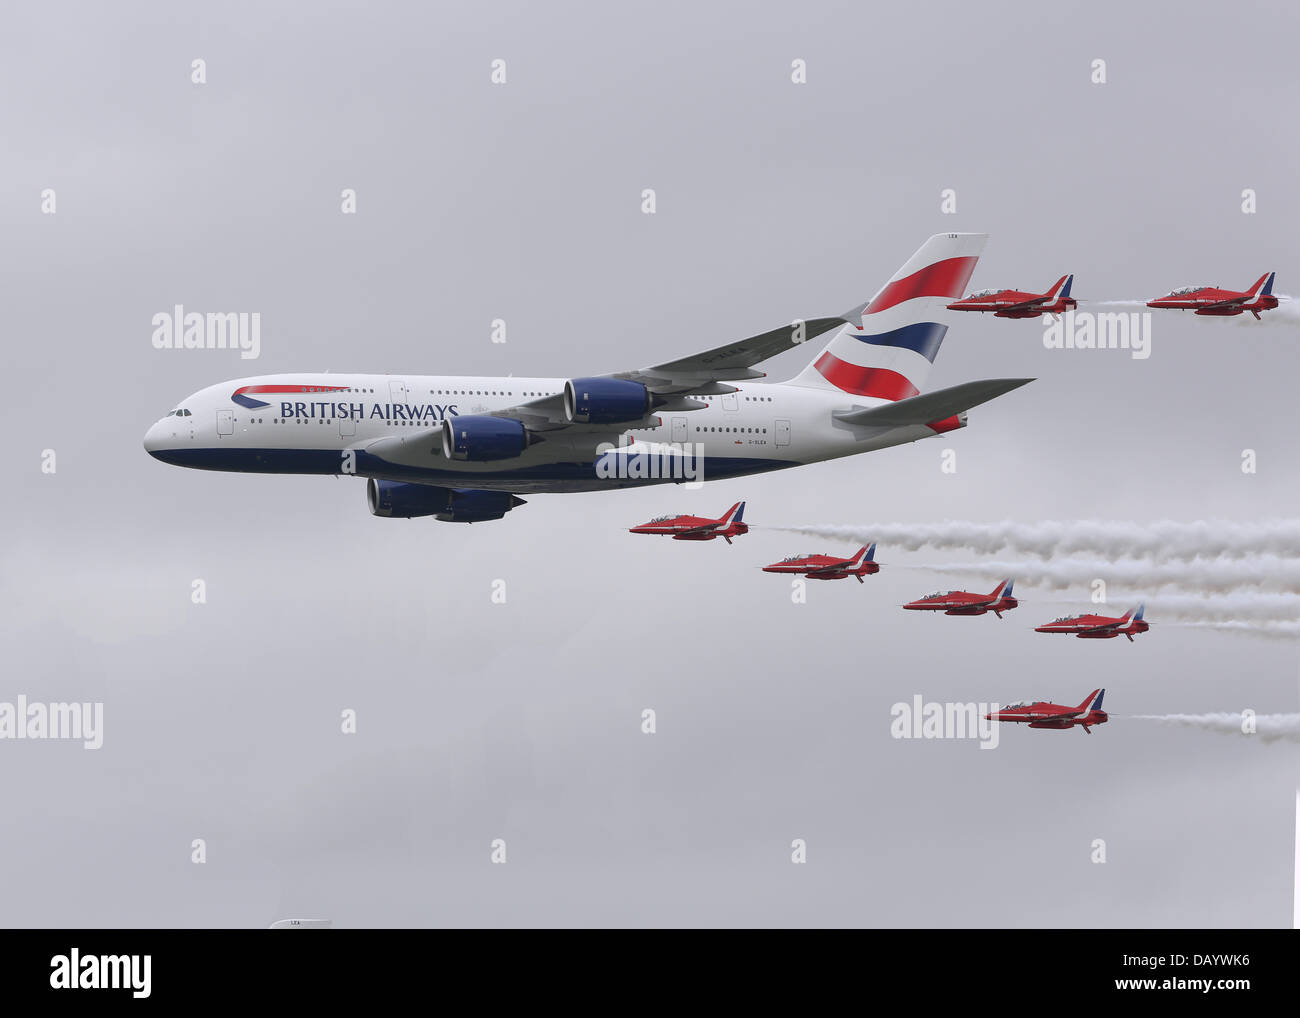 Fairford, UK. 20th July, 2013. The Airbus 380 is about to enter service with British Airways.  To celebrate this their first Airbus 380 performed a flypast in formation with the Red Arrows at the 2013 Royal International Air Tattoo Stock Photo